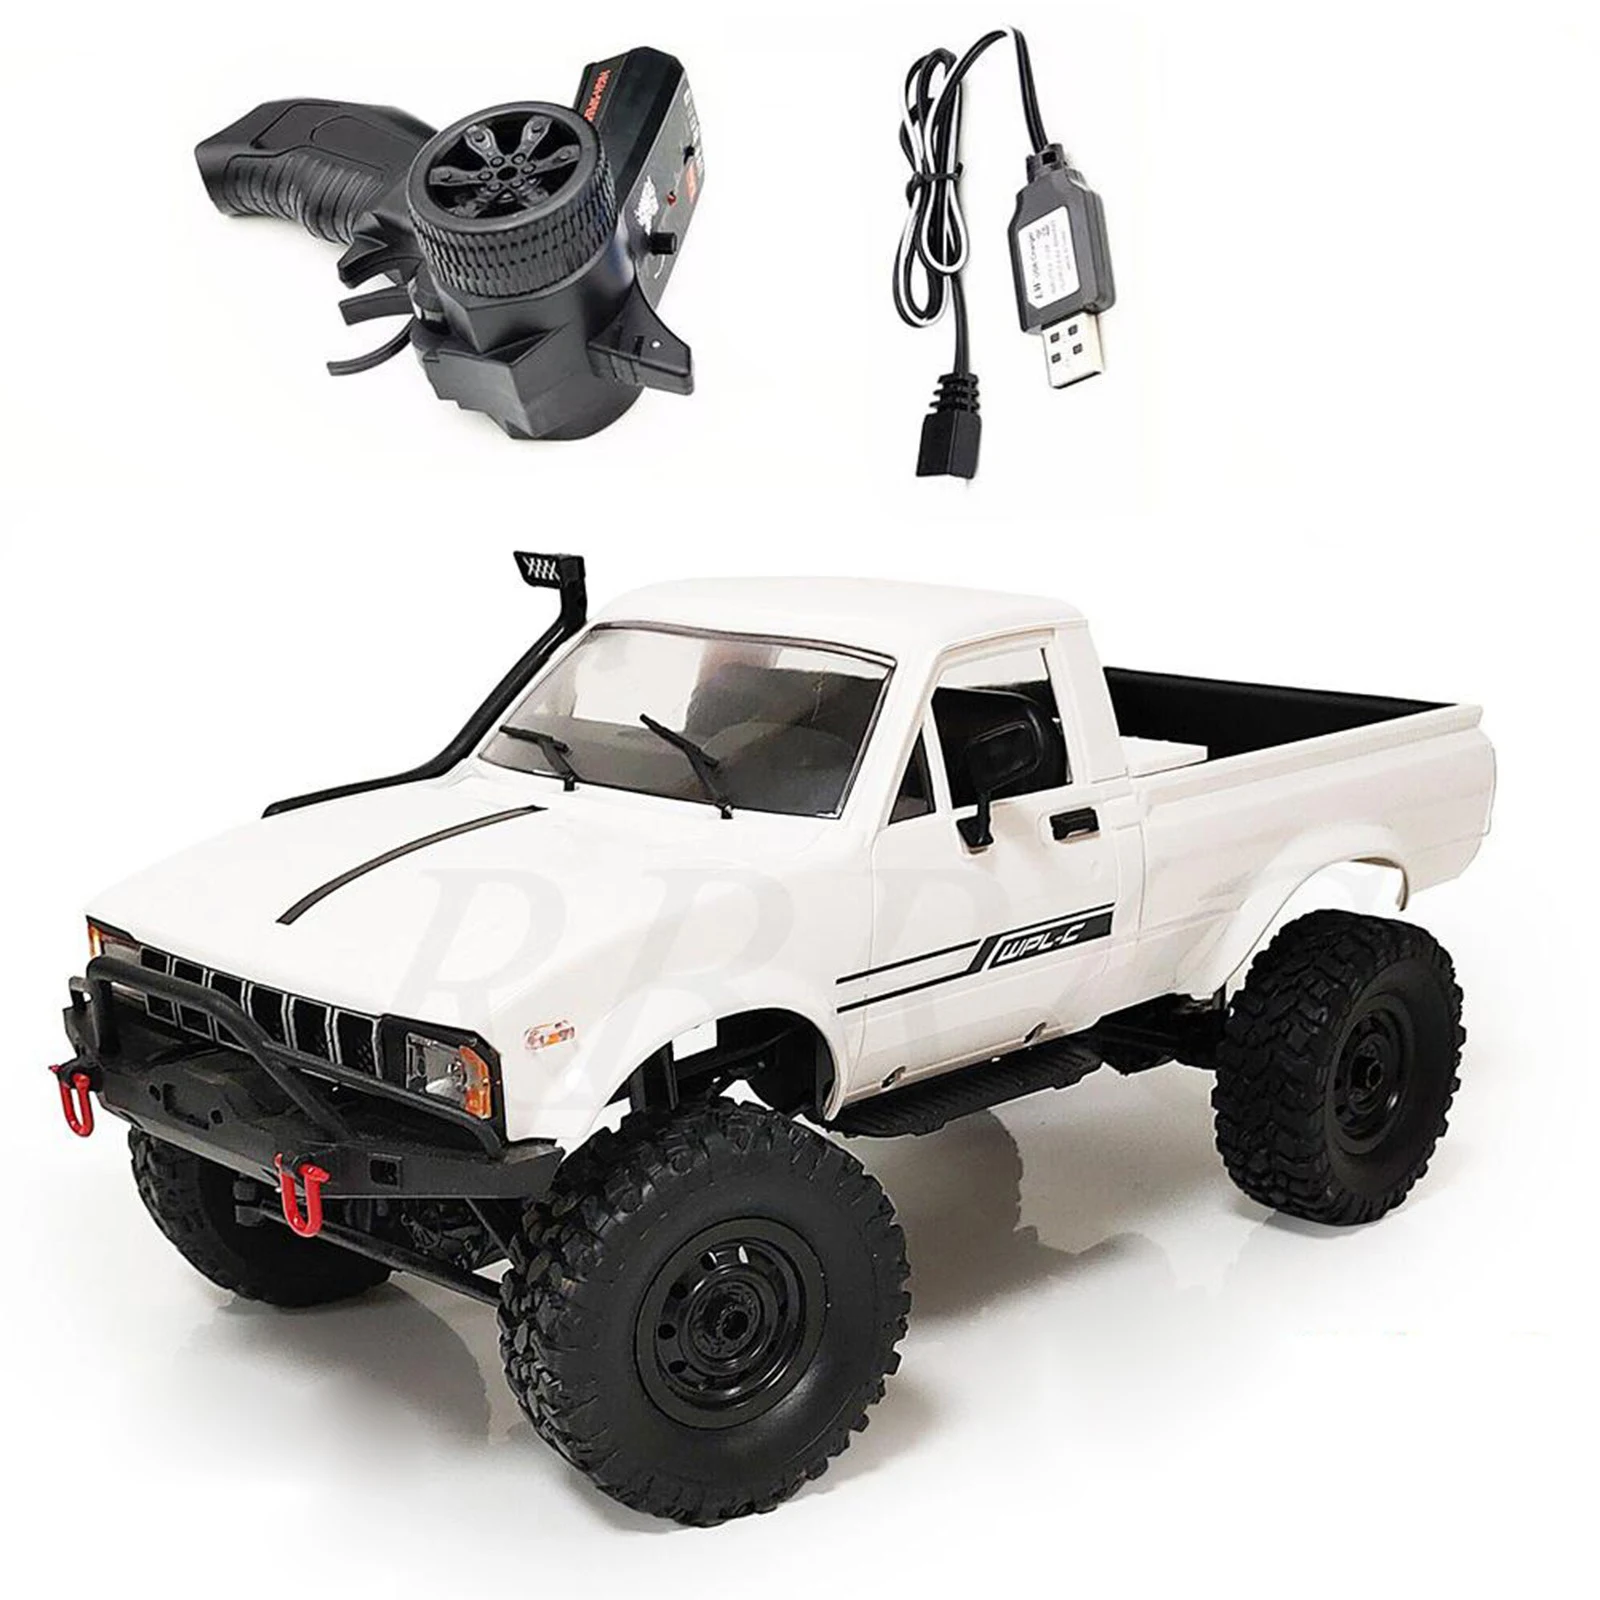 1 : 16 Scale 1:16 2.4G C24-1 kit WPL Speed Model RC Car Pickup Off-Road Truck High Speed Crawlers Vehicle for Adults Kids